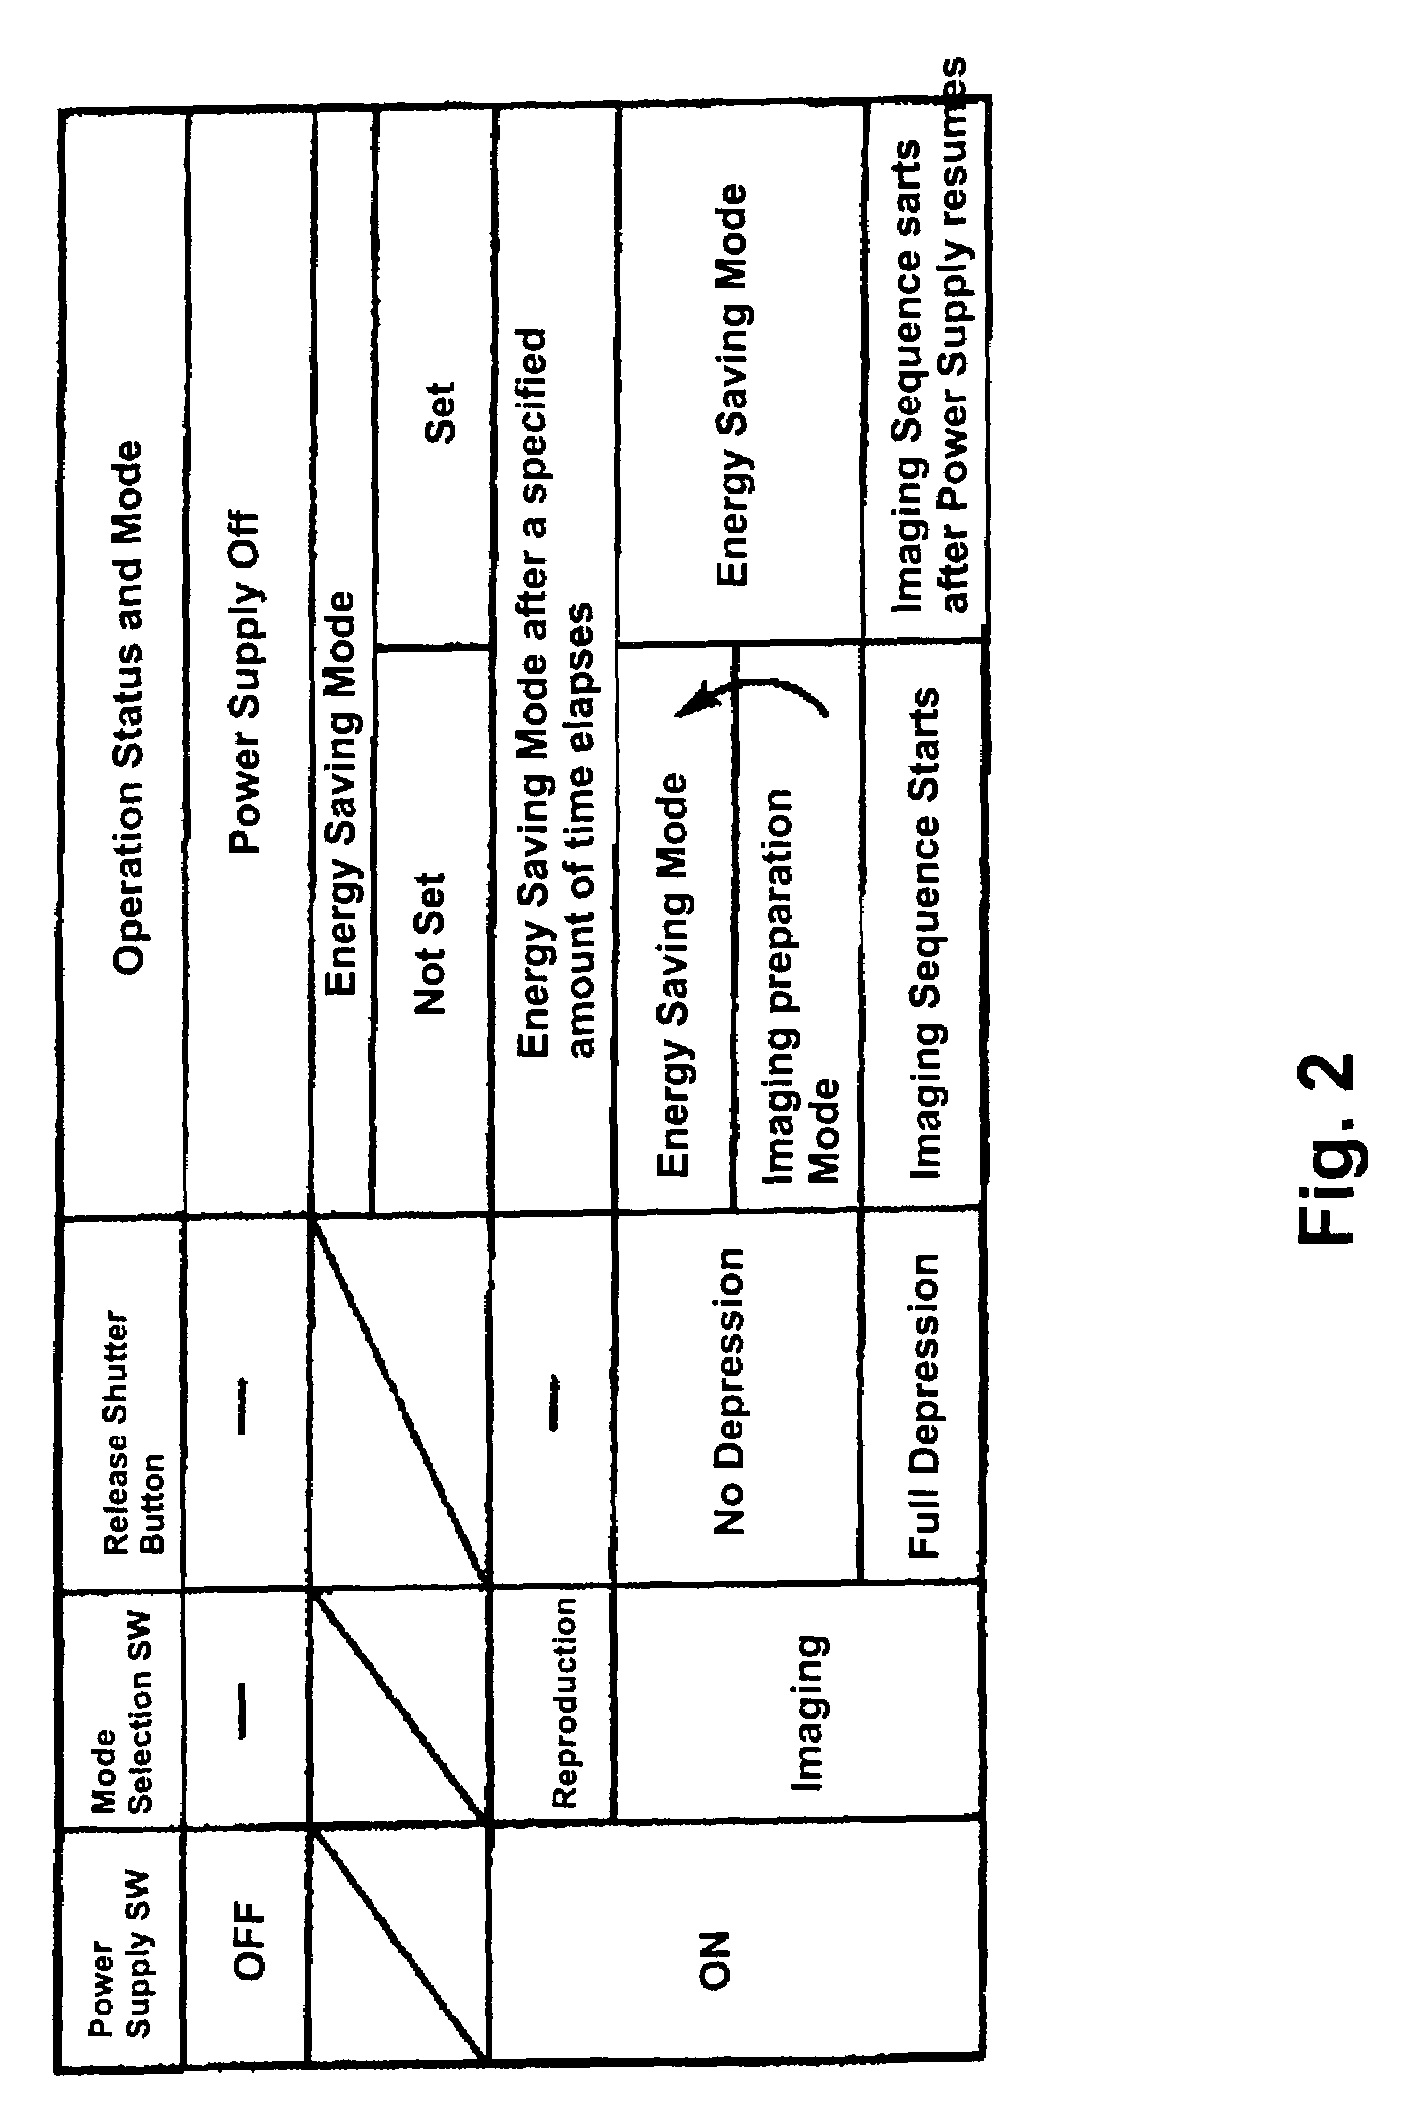 Digital camera apparatus with high speed imaging and energy saving features